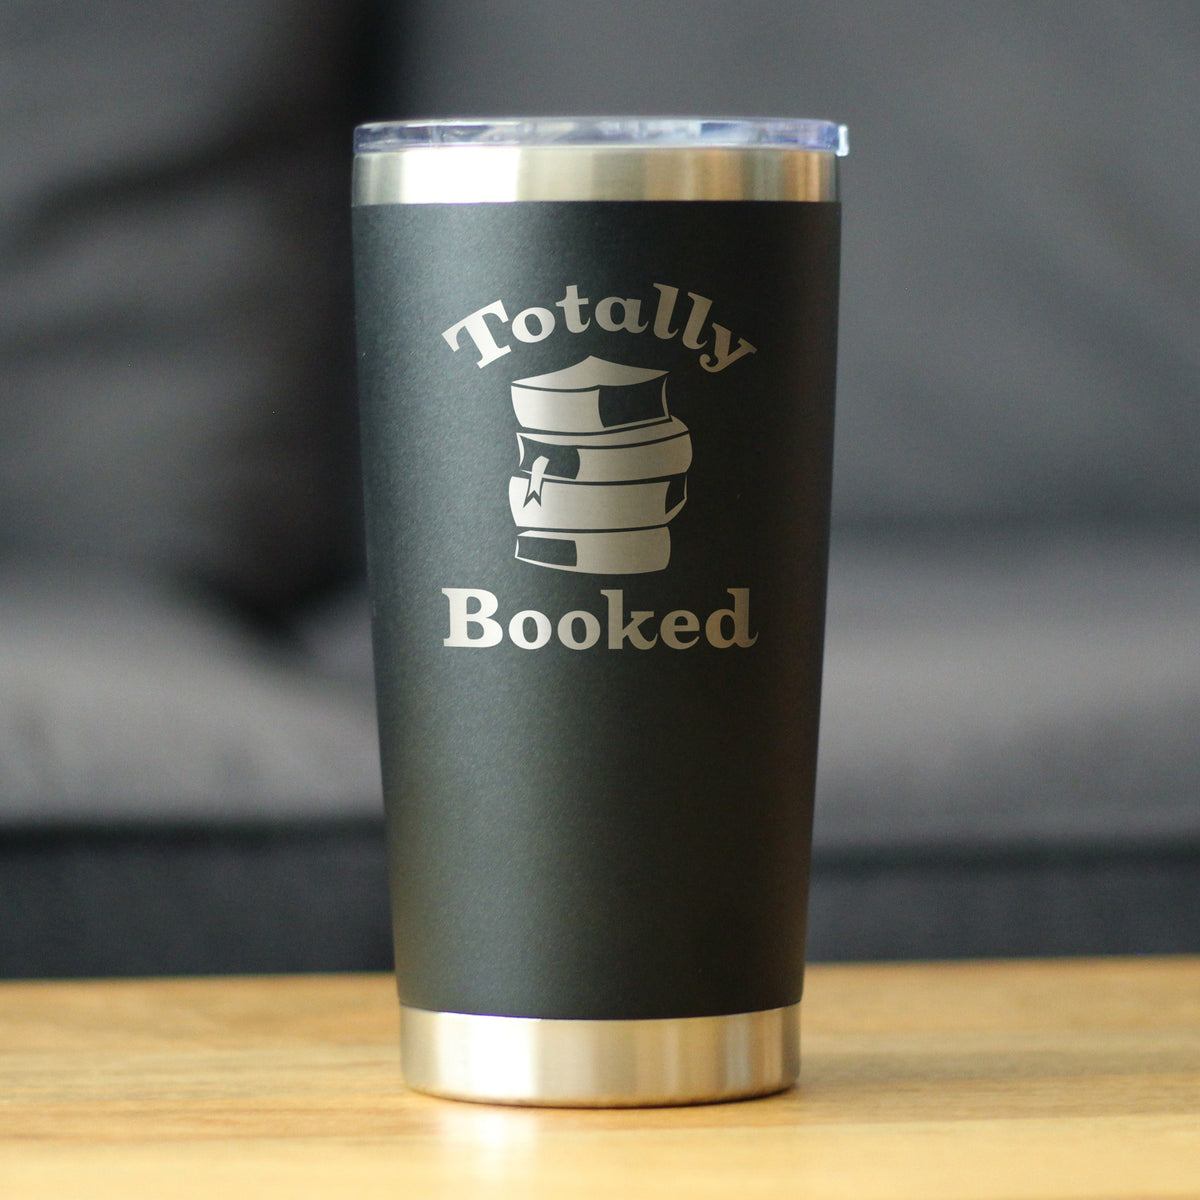 Totally Booked - Insulated Coffee Tumbler Cup with Sliding Lid - Stainless Steel Travel Mug - Unique Reading Gifts for Women and Men Readers